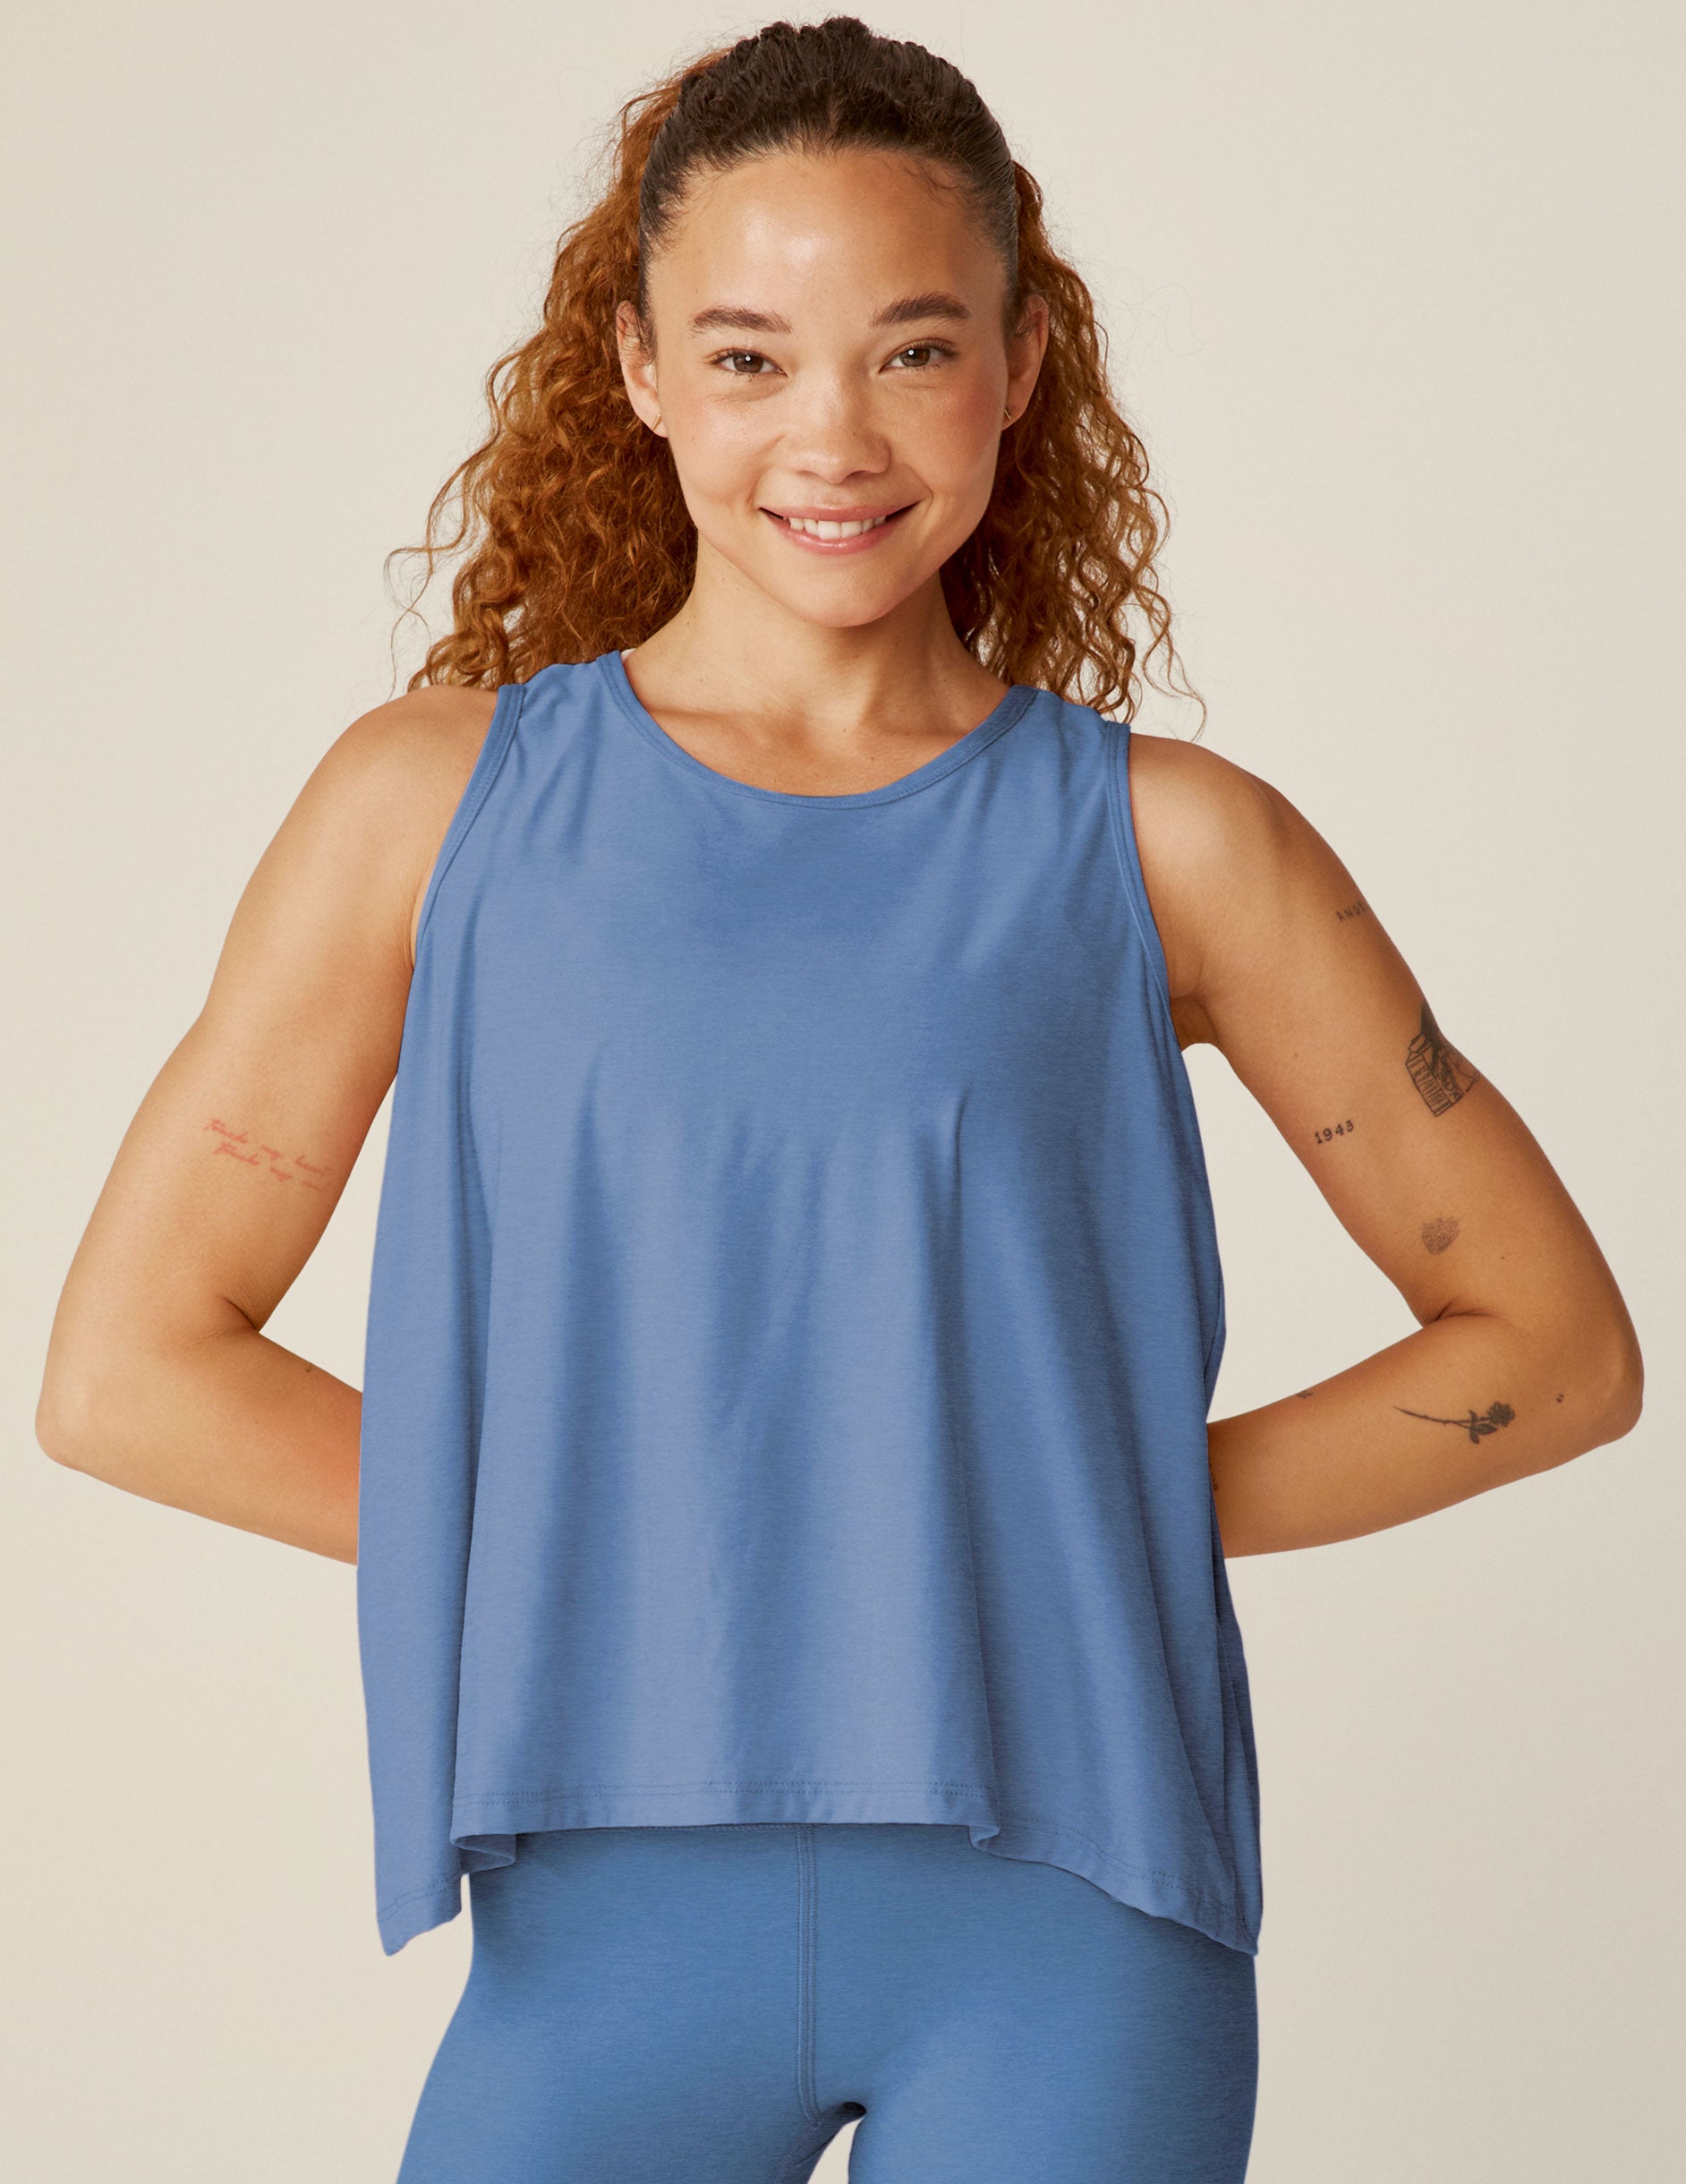 blue scooped neck tank top with a flounce open back design. 